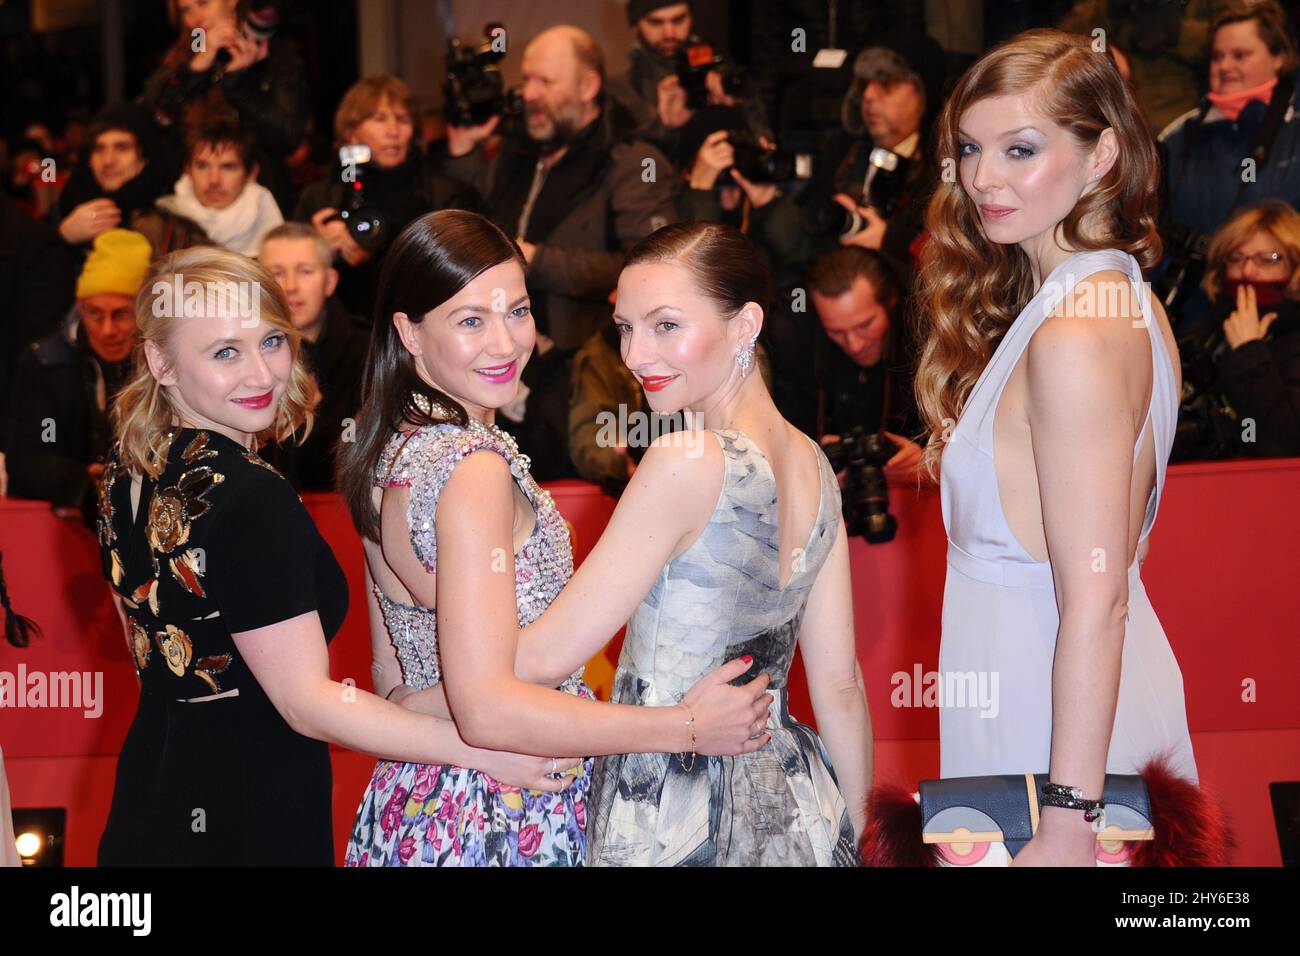 Sibel Kekilli, Hannah Herzsprung, Katharina Schuettler attending the Nobody Wants the Night premiere opening the 65th Berlinale, Berlin International Film Festival, in Berlin, Germany, February 5, 2015. Photo by Aurore Marechal/ABACAPRESS.COM Stock Photo